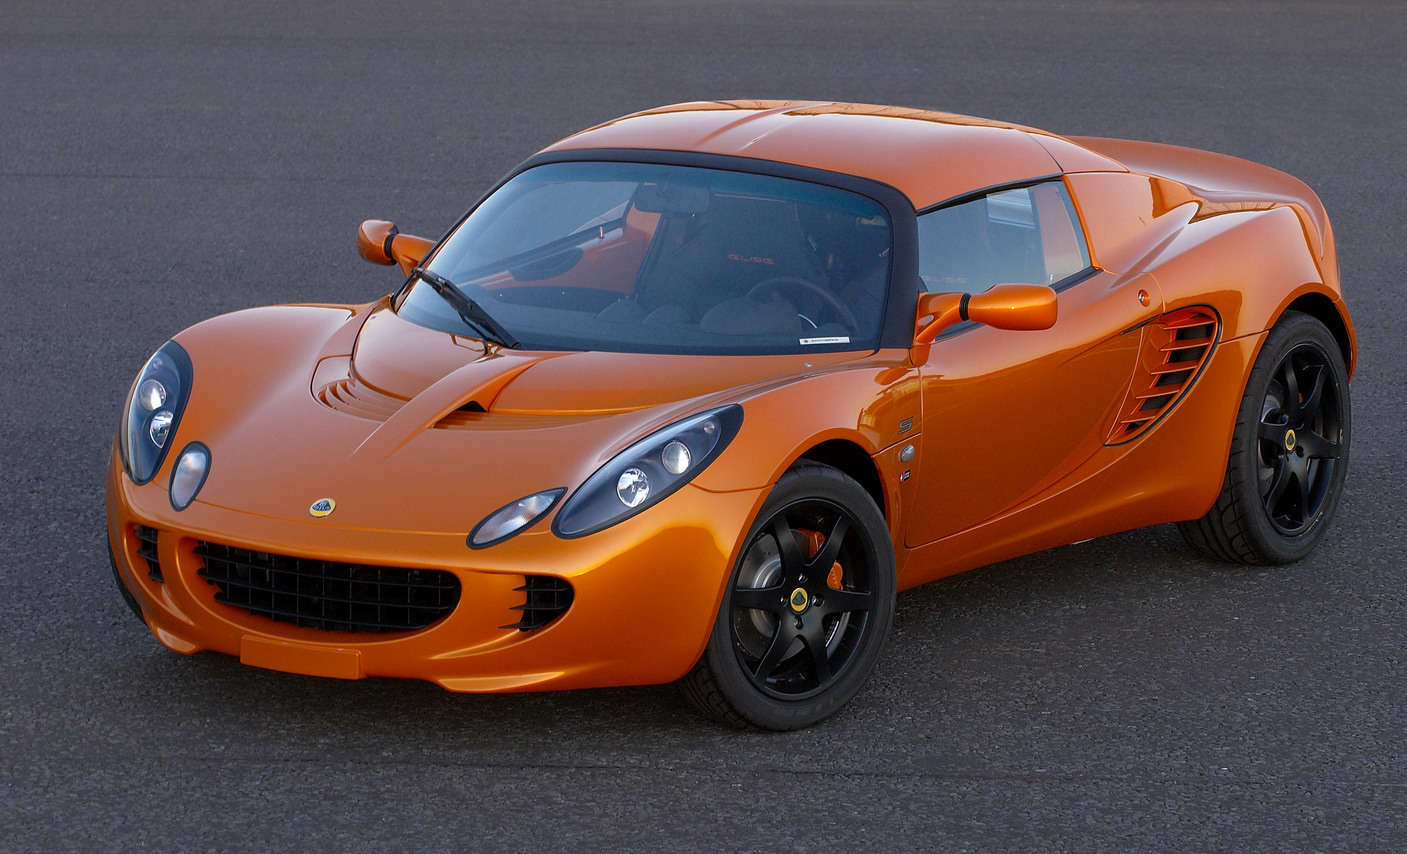 Lotus Elise S 40th Anniversary Limited Edition - Cars